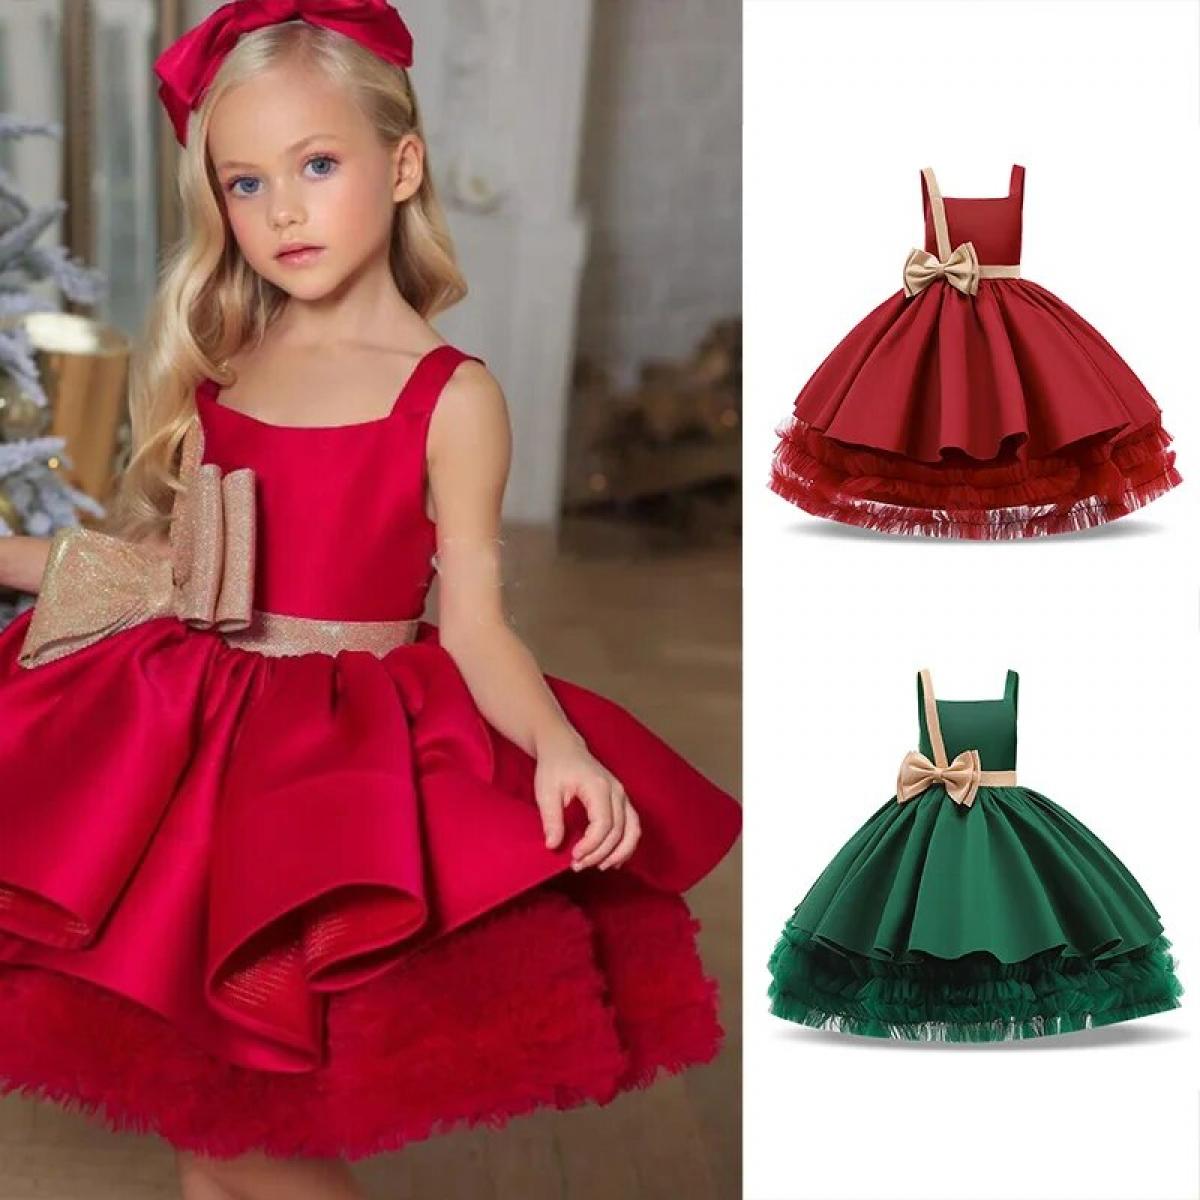 Suspenders Wedding Dress For Girls Elegant Party Tutu Pageant Ball Gown Kids 3 4 5 6 7 Year Evening Formal Children Comm